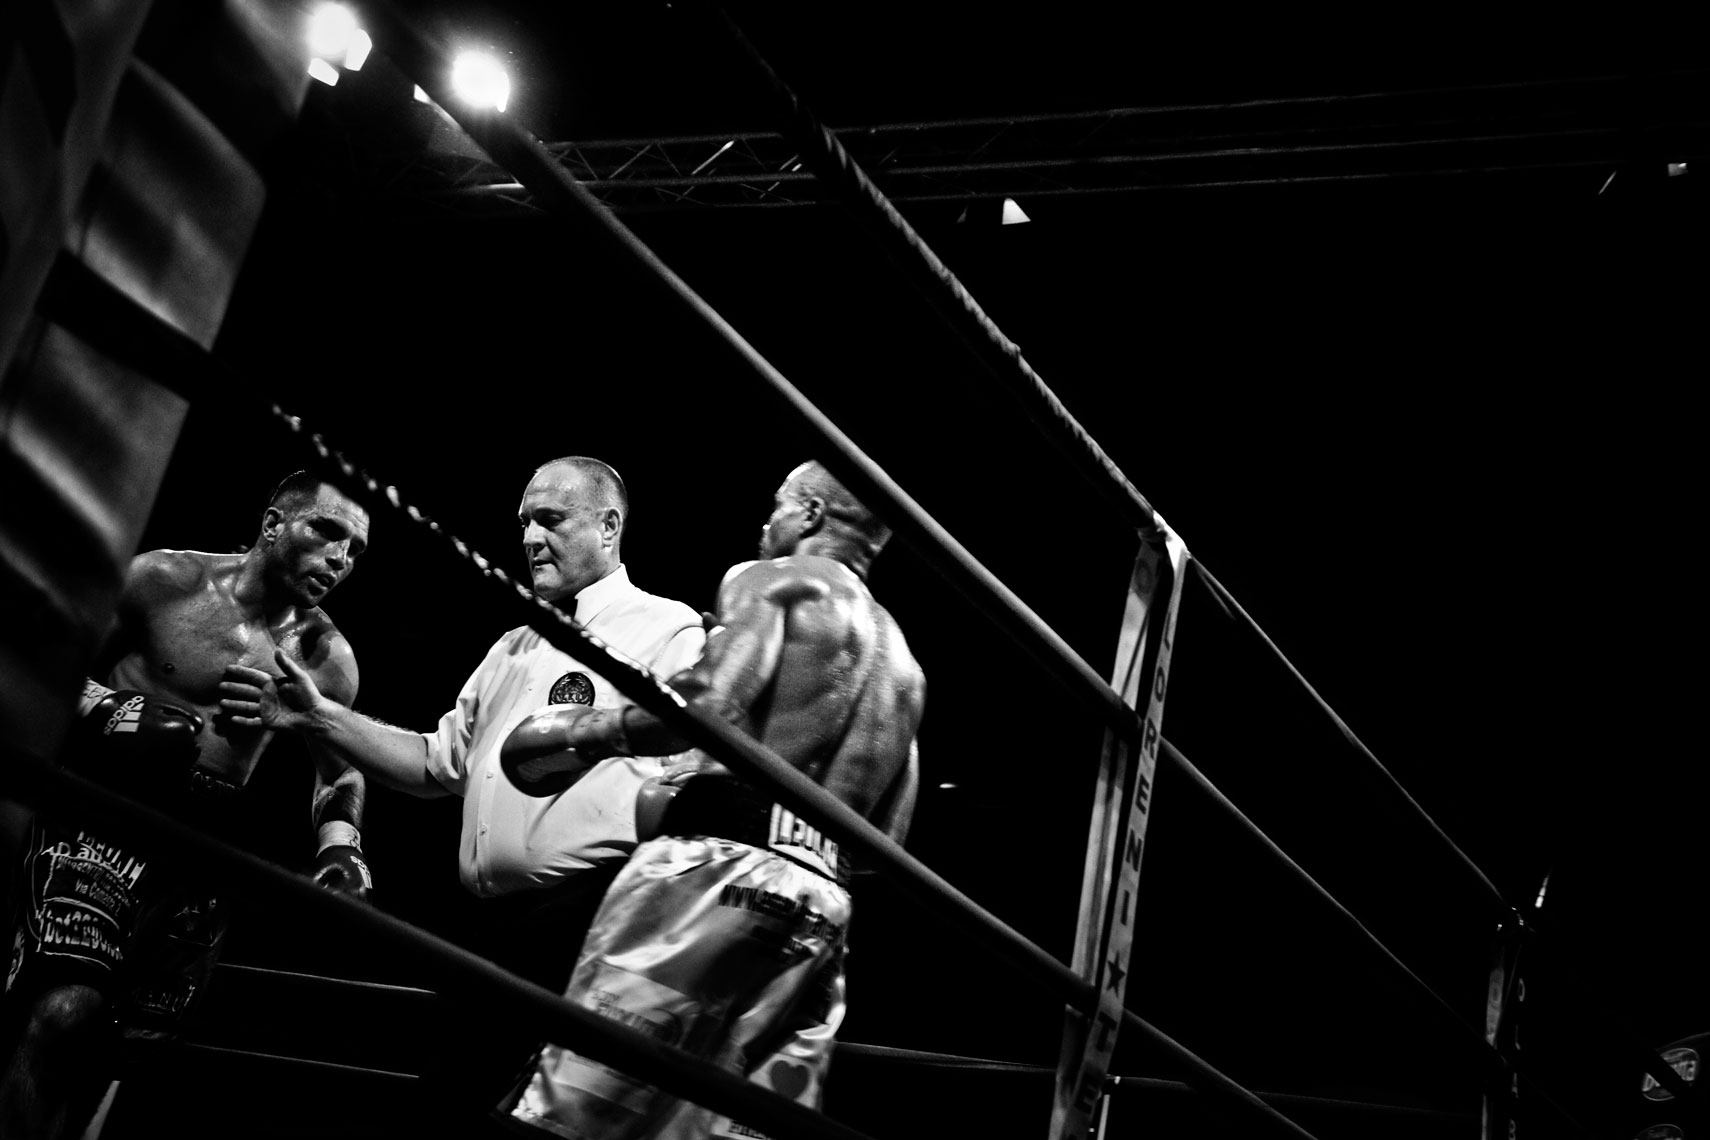 ITALY. Florence, 4th November 2011. Mandela Forum, the night of the match for the EBU (European Boxing Union) Welter Weight crown, Leonard Bundu and Daniele Petrucci fighting.